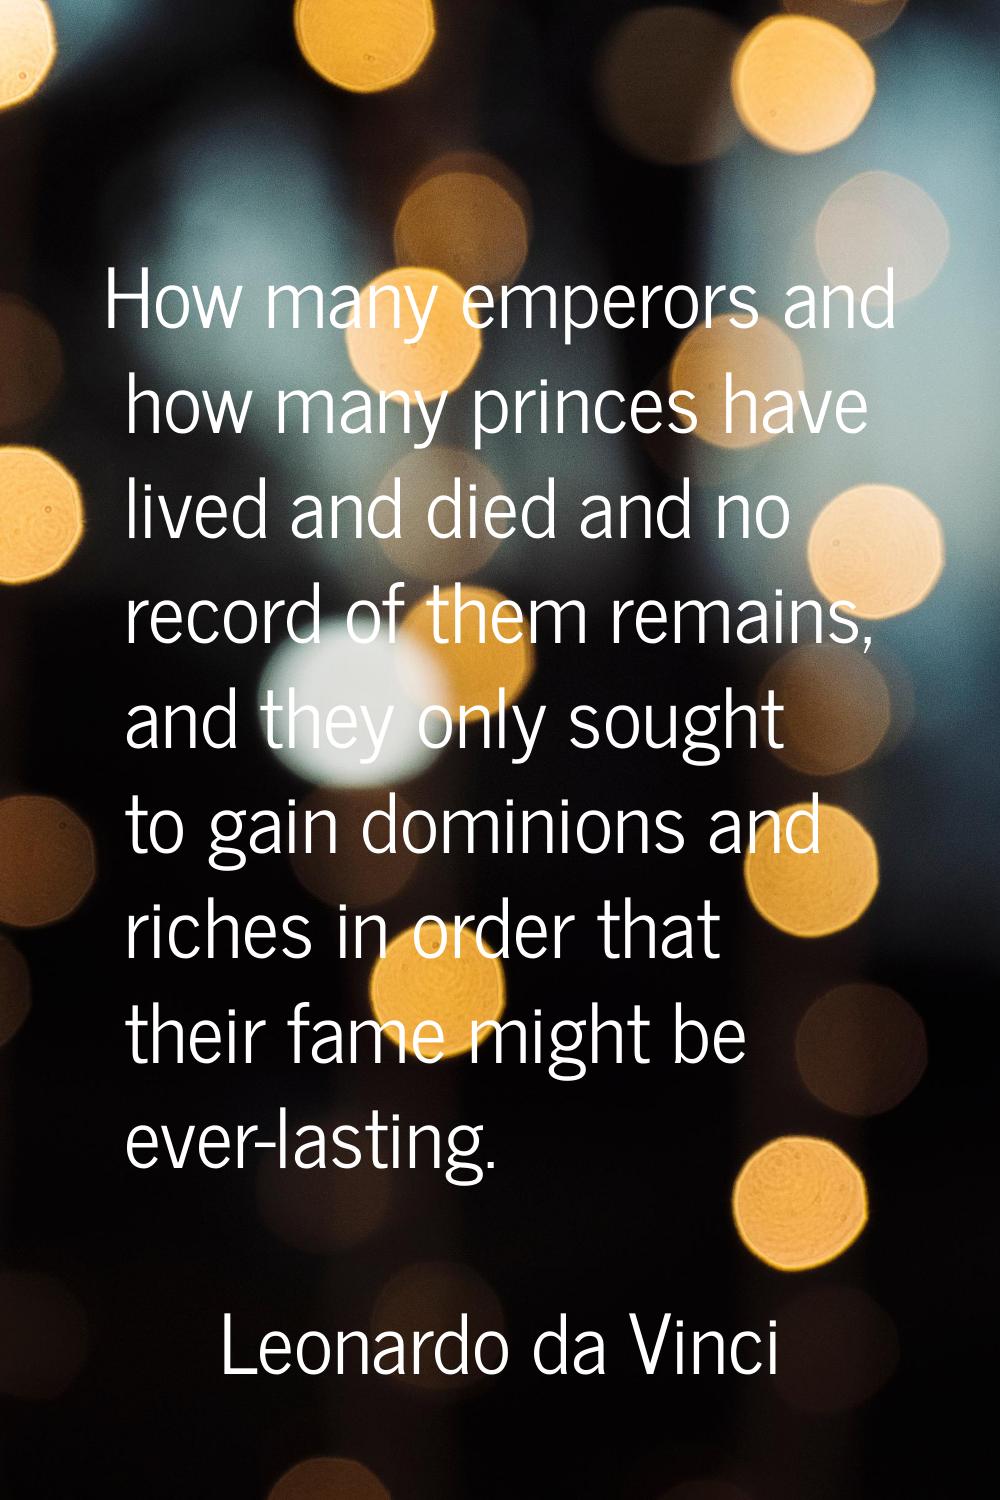 How many emperors and how many princes have lived and died and no record of them remains, and they 